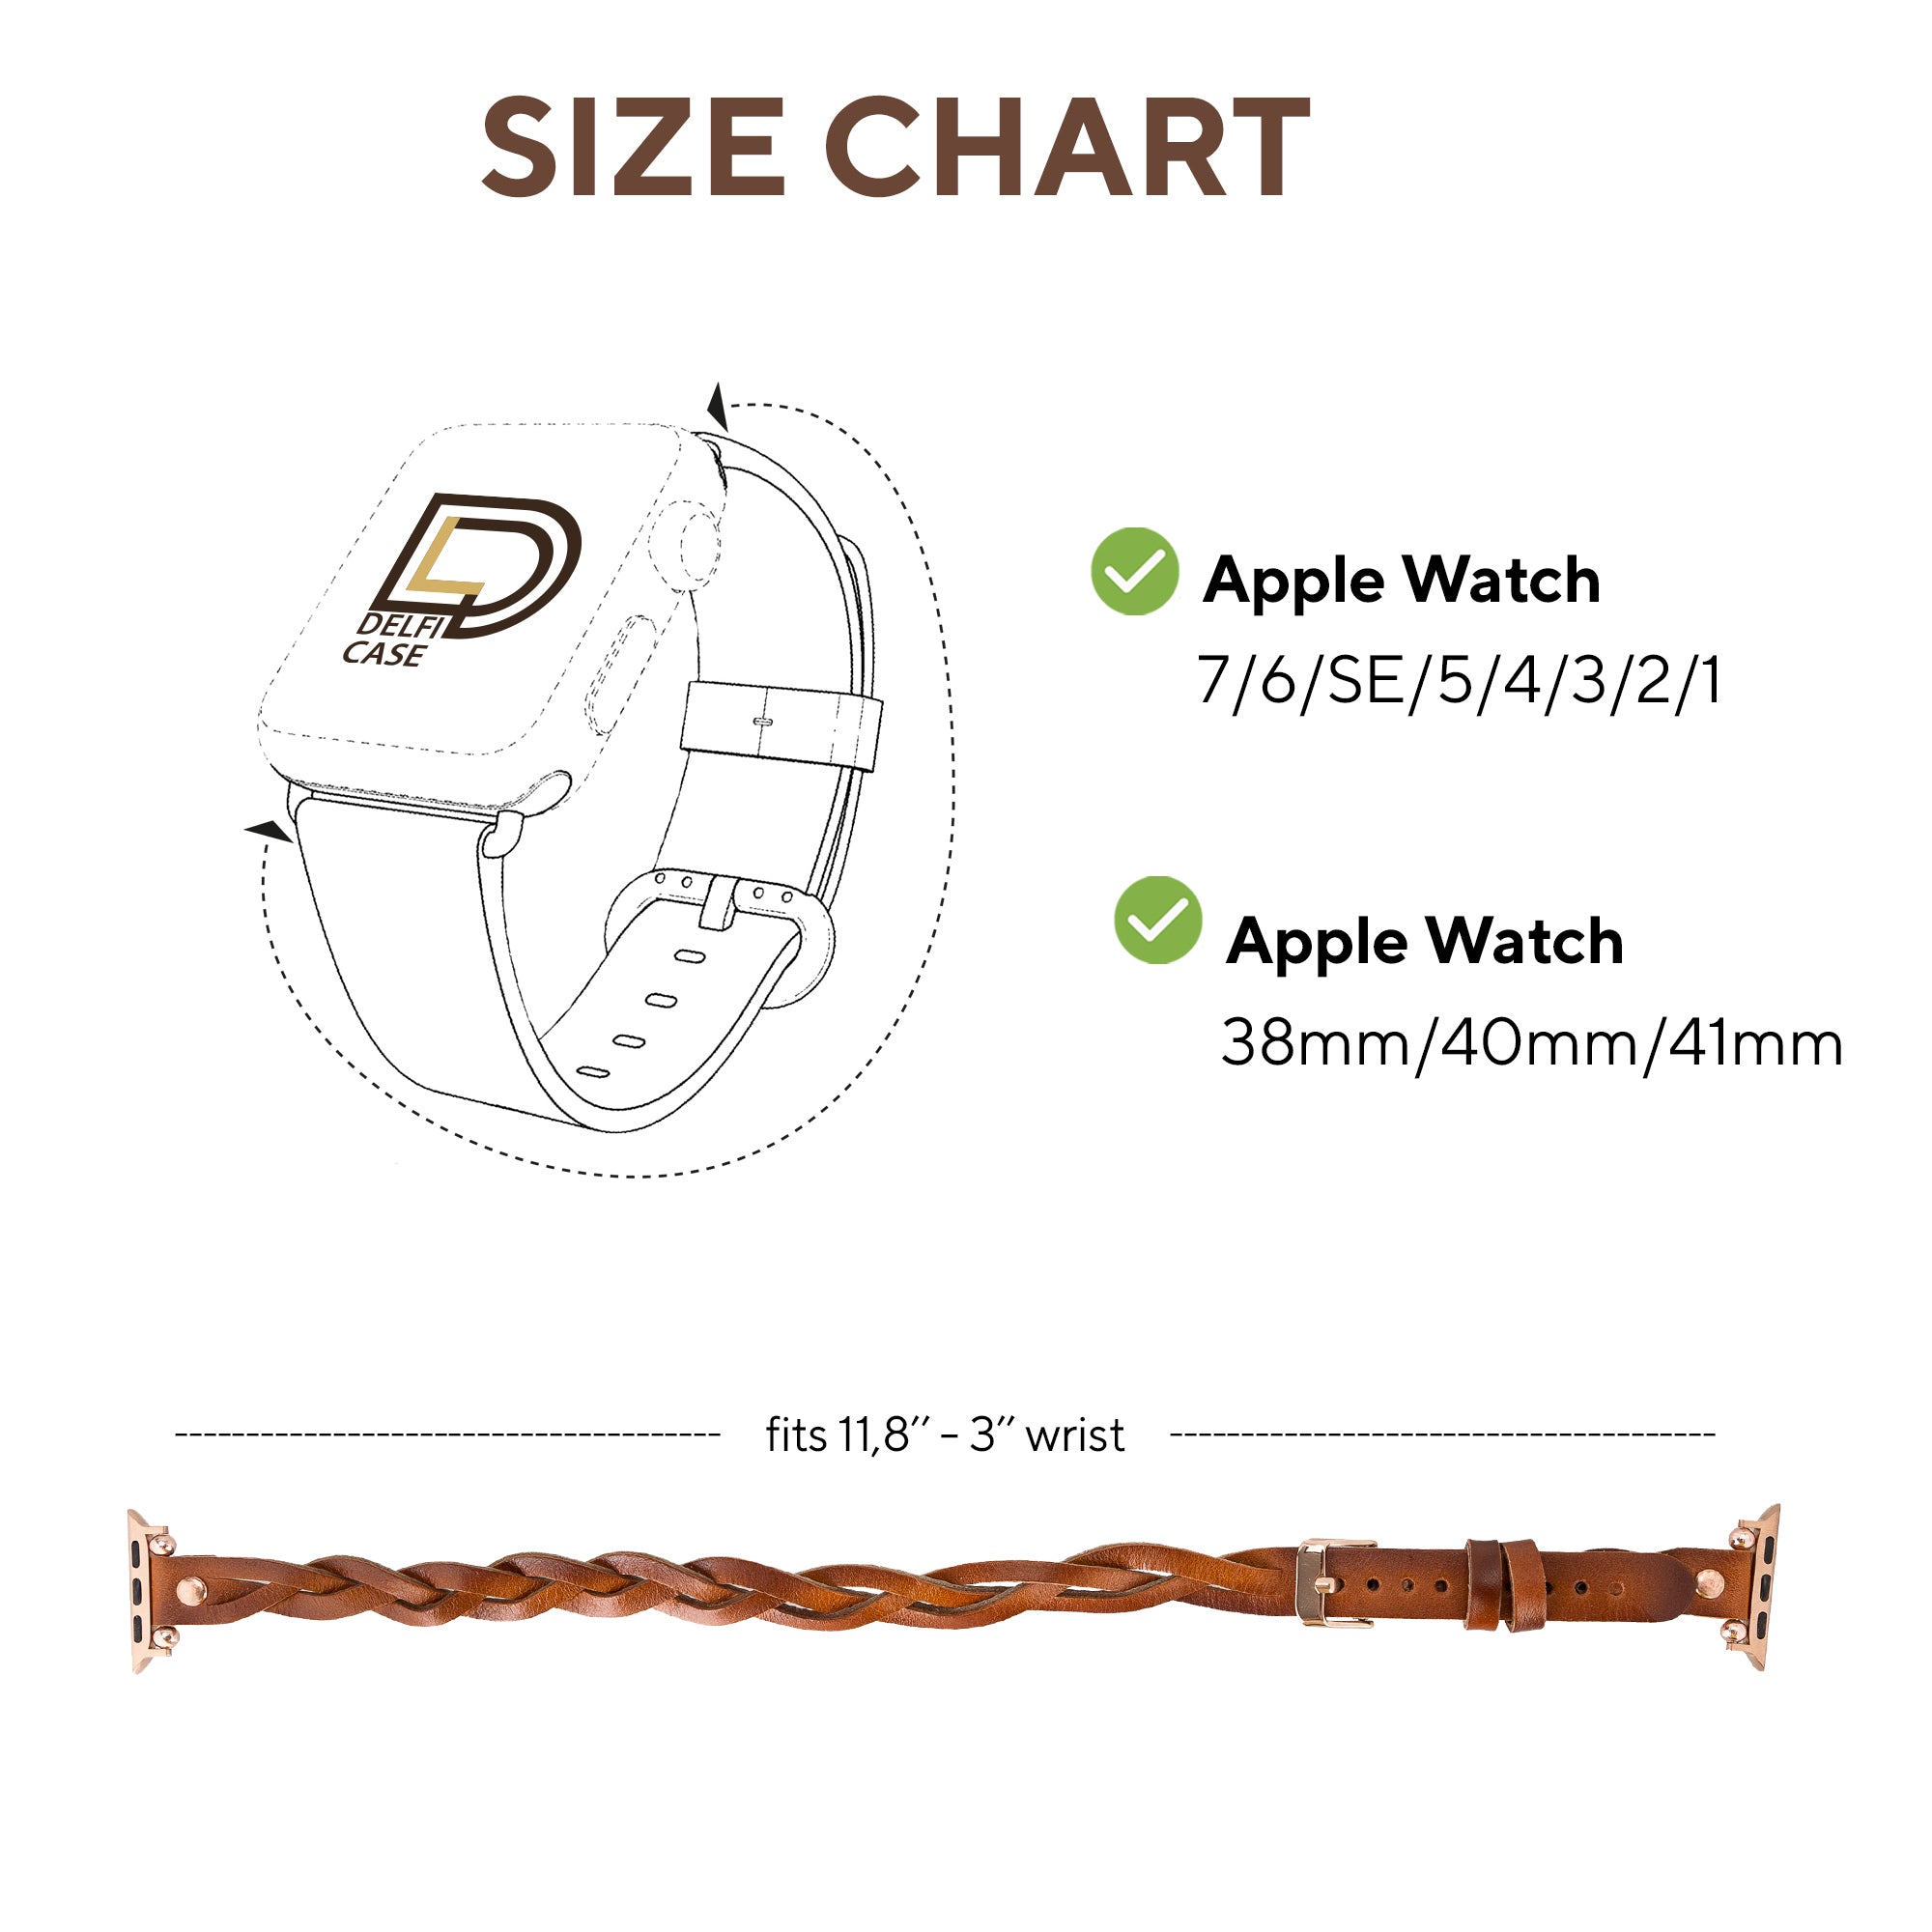 DelfiCase Sheffield Double Tour Watch Band for Apple Watch & Fitbit/Sense 66